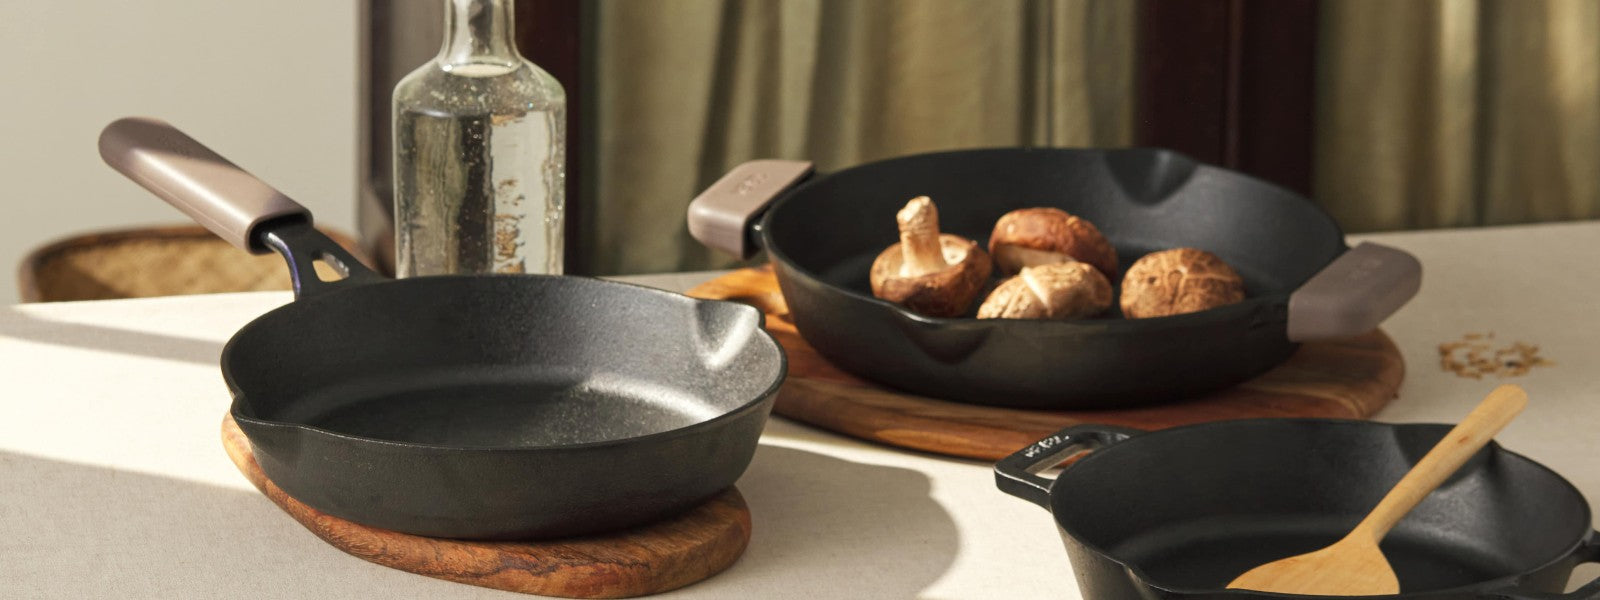 Cast Iron Frying Pans: Benefits, Uses & Maintenance Tips in India | Pots and Pans India